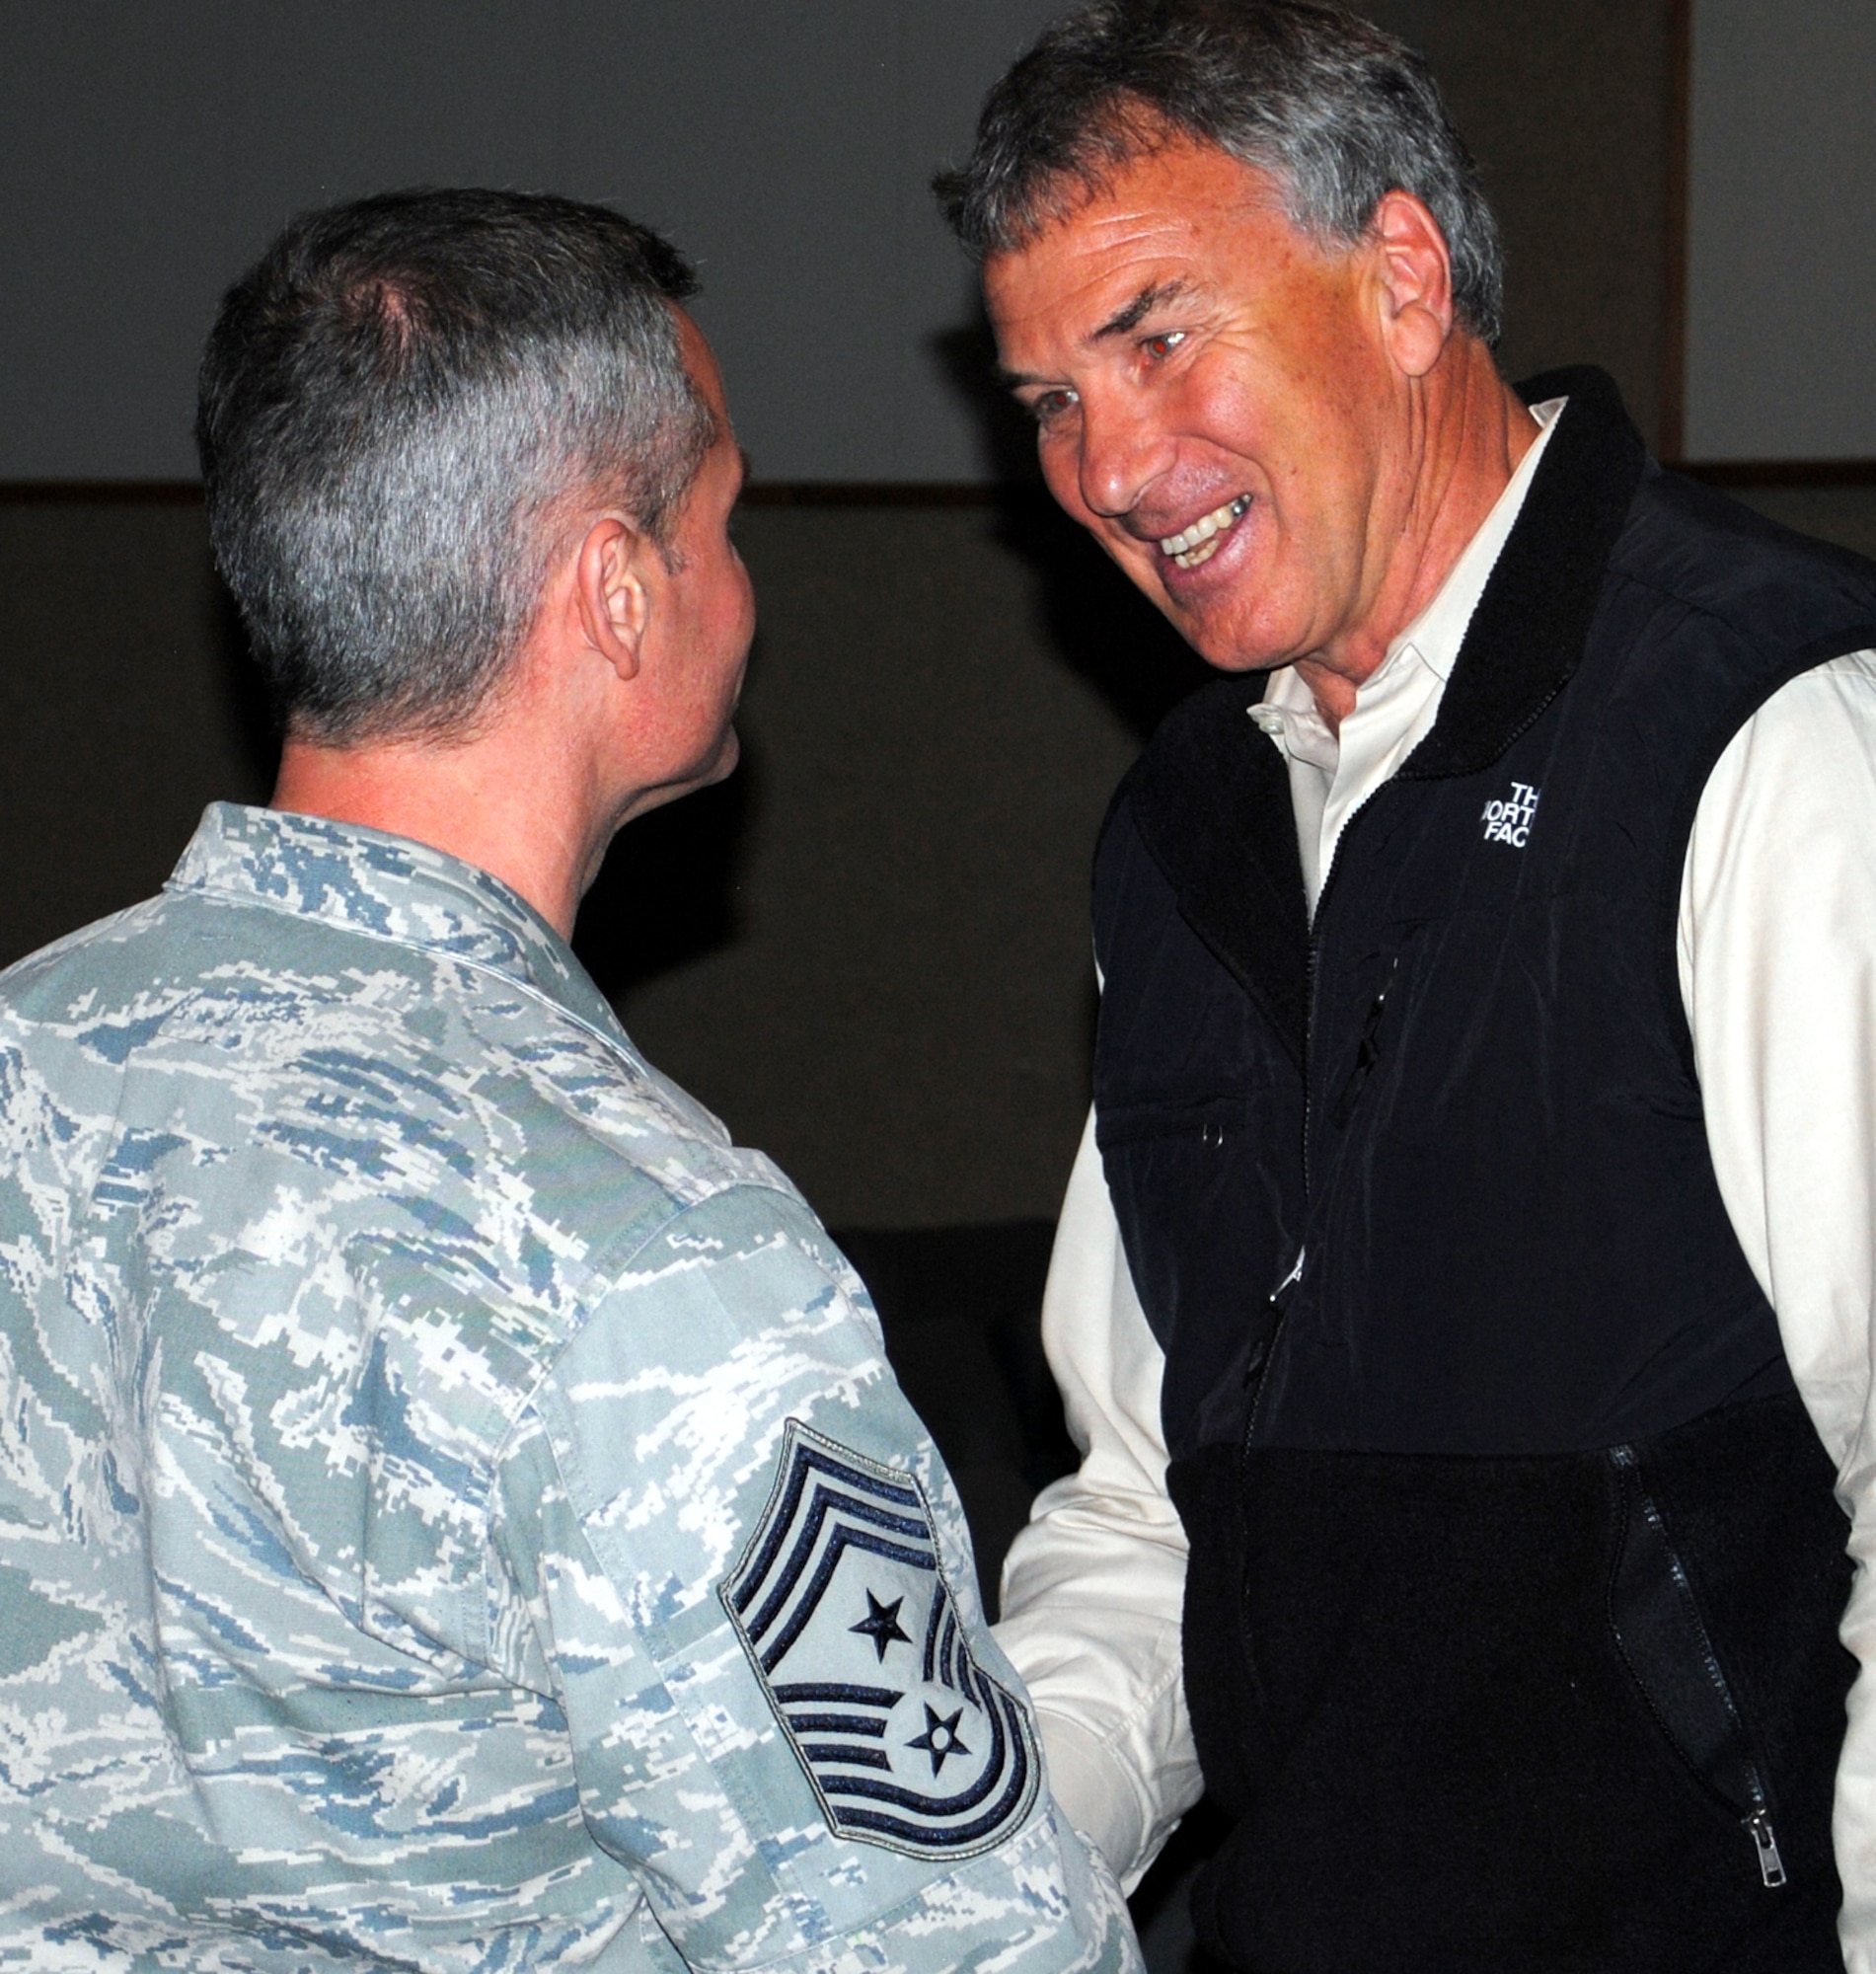 Chief Master Sgt. Charles Anderson, 341st Missile Wing command chief, shakes the hand of Tom Whittaker, the first disabled person to reach the summit of Mount Everest.  Whittaker told his story of pursuing, and eventually achieving, his dreams after losing his right foot due to a car accident he was involved in in his early 30's.  (U.S. Air Force photo/Airman 1st Class Cortney Paxton)